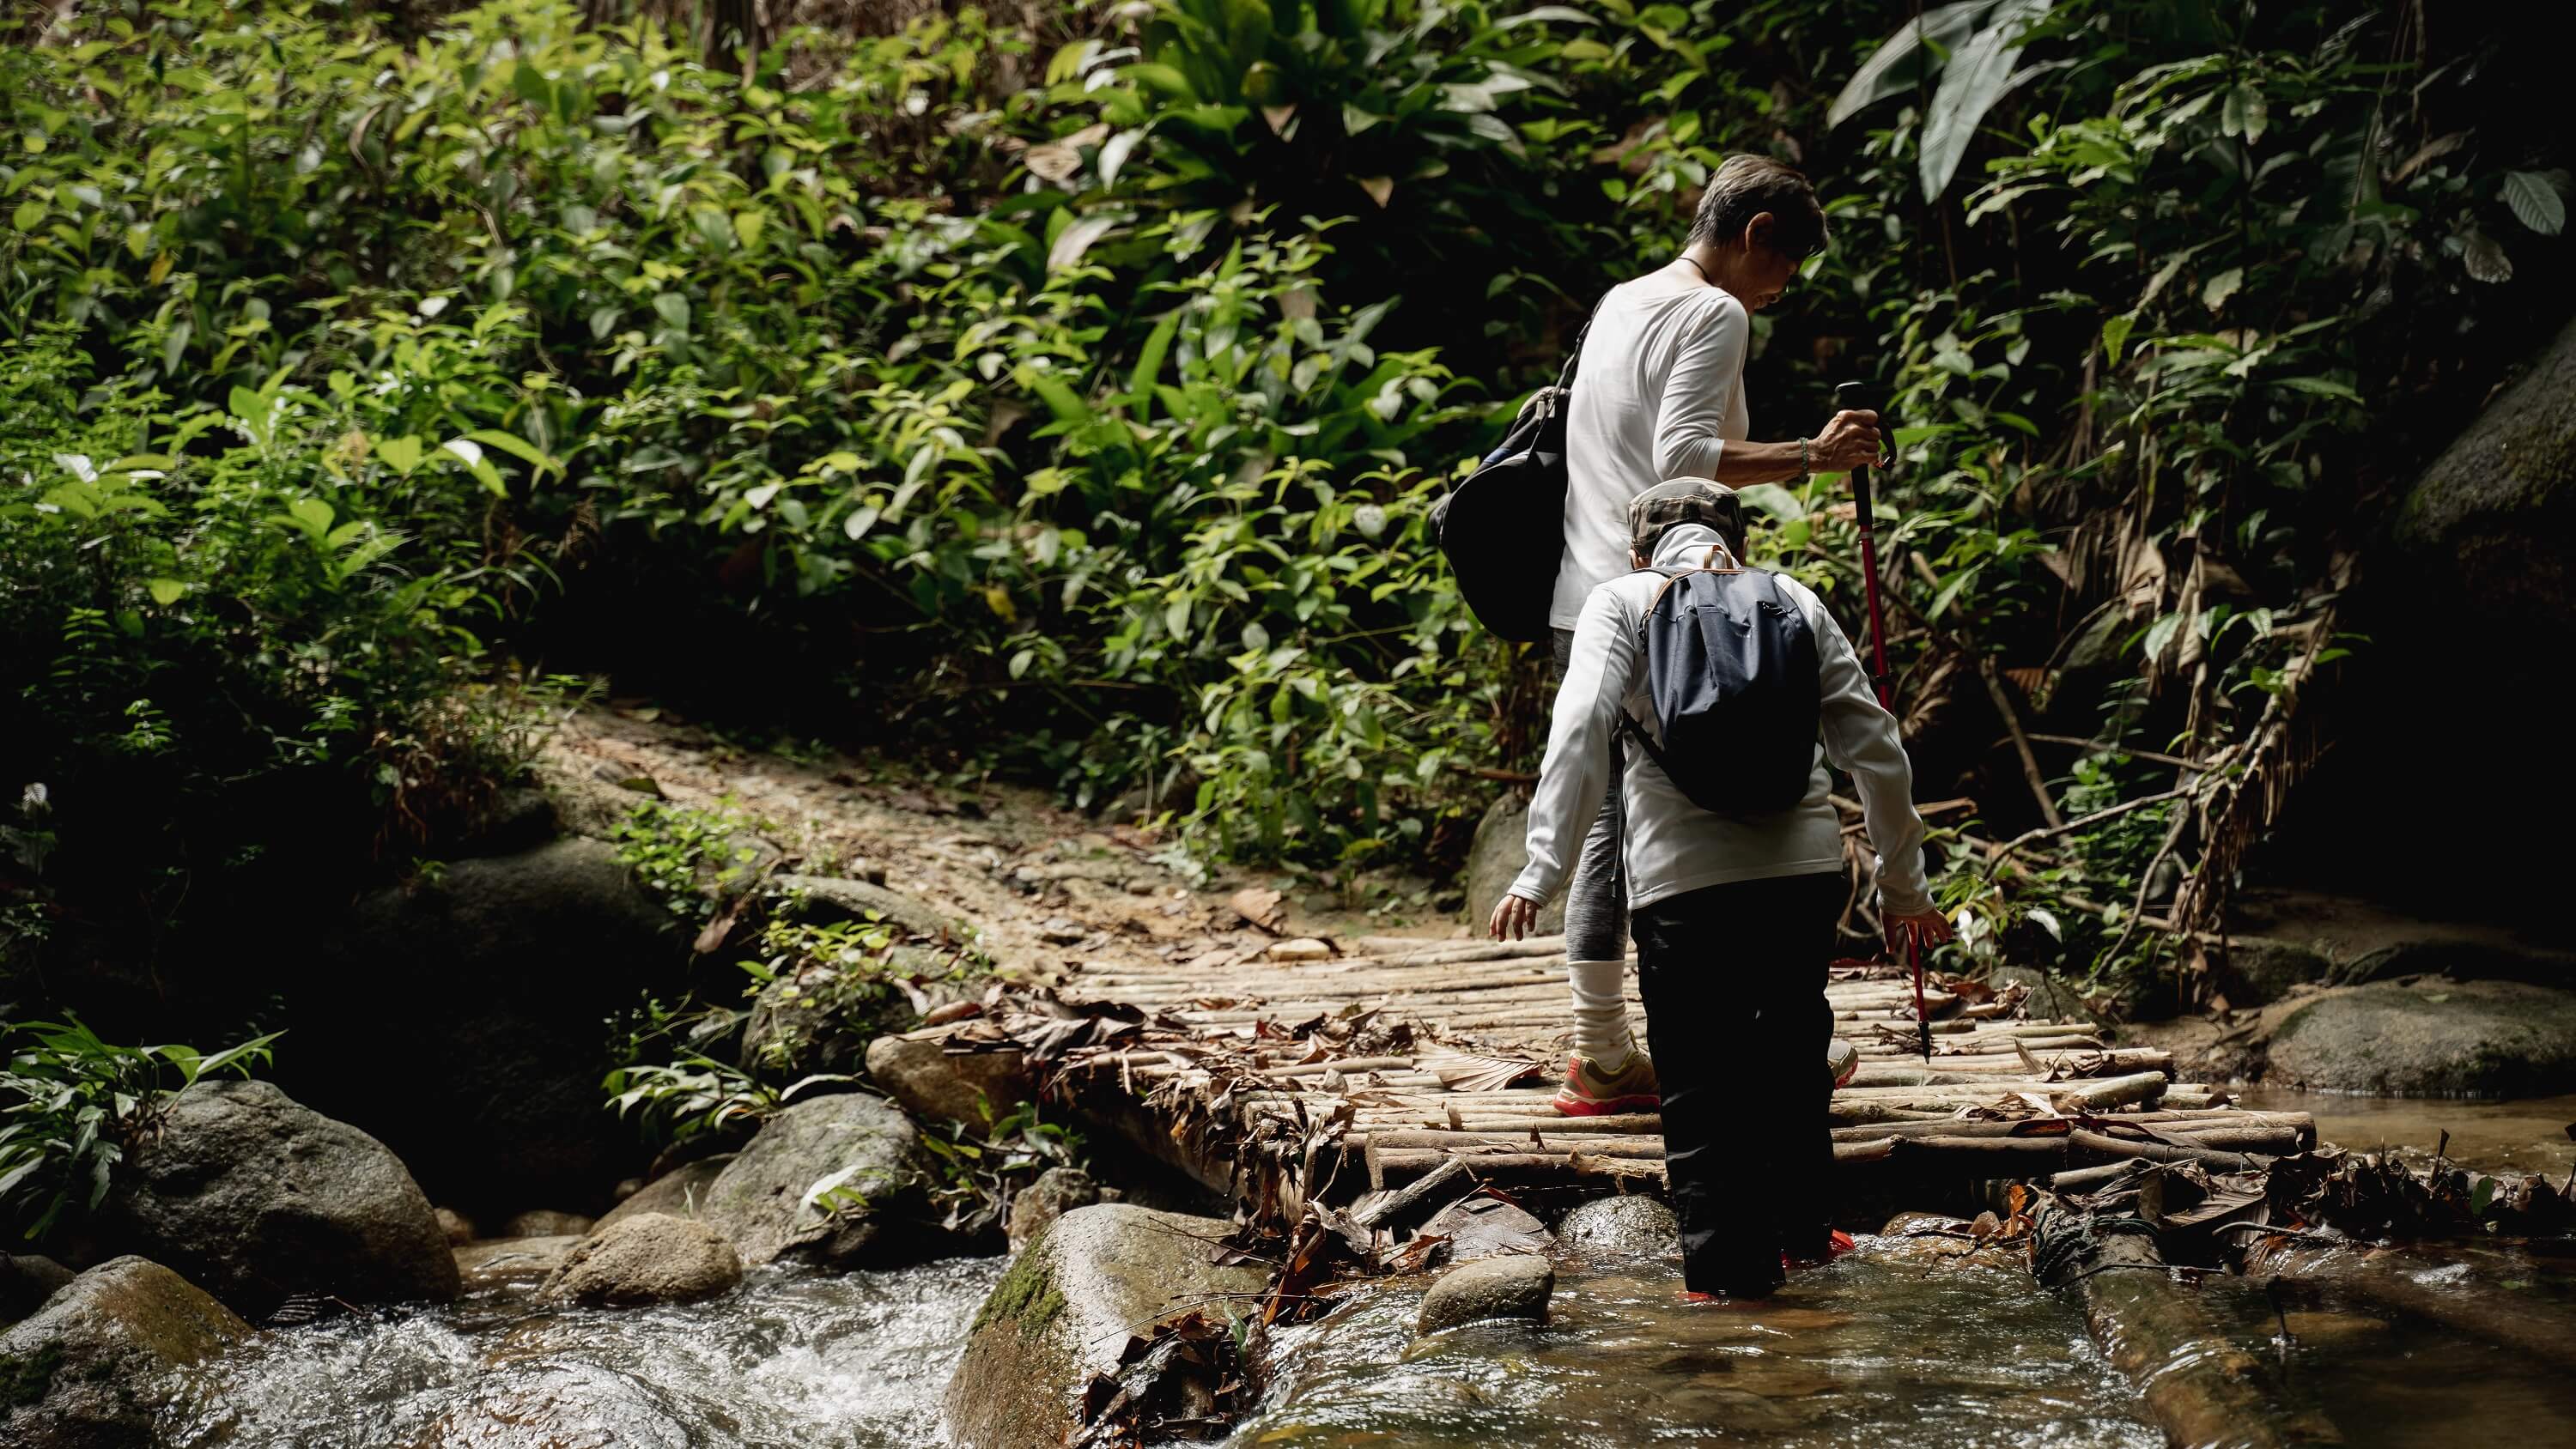 Two people crossing a stream in a forest in Malaysia